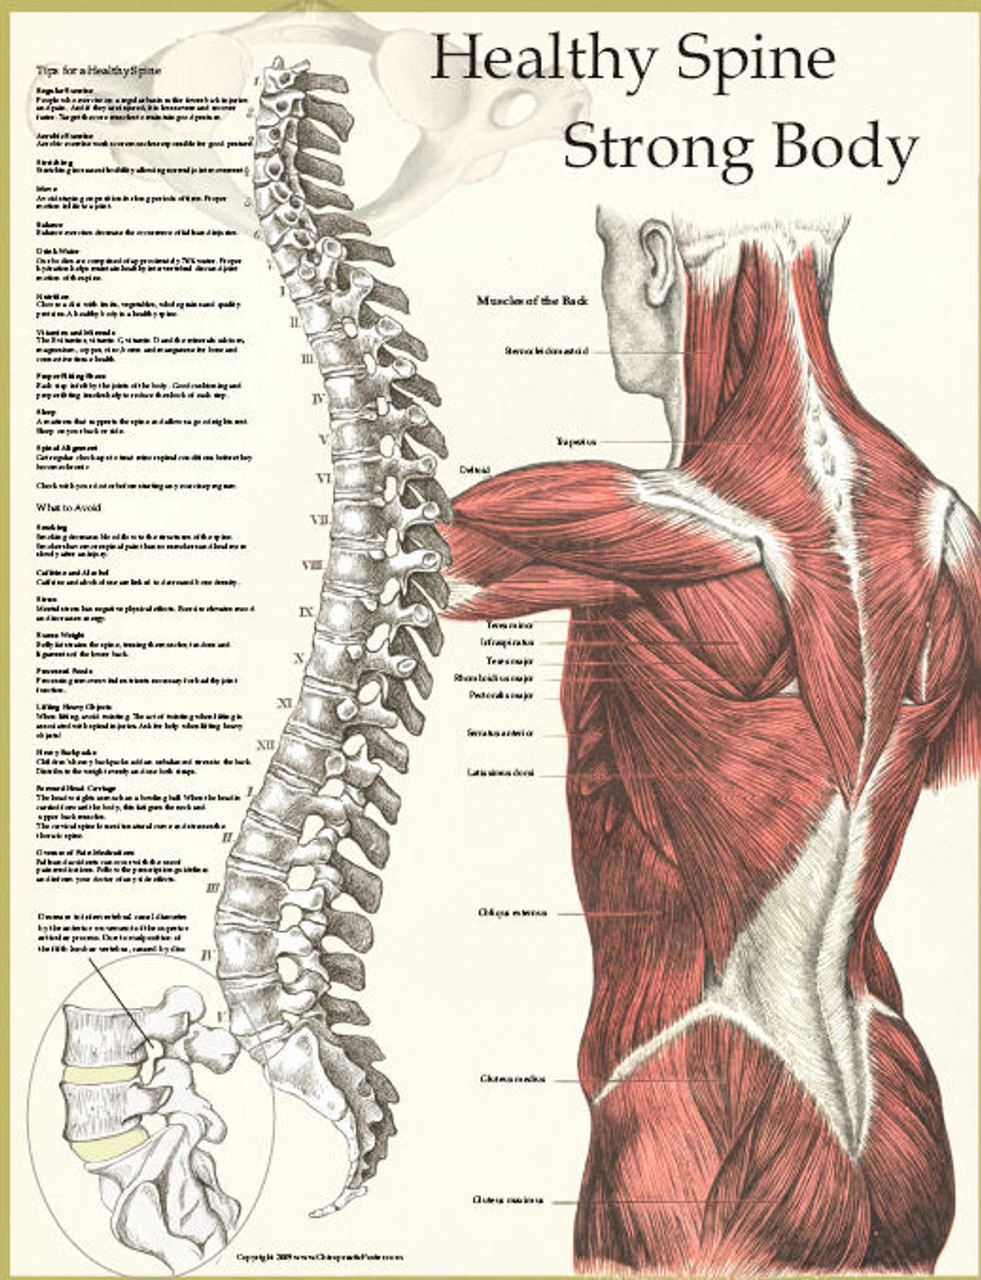 Healthy Spine / Strong Body Poster